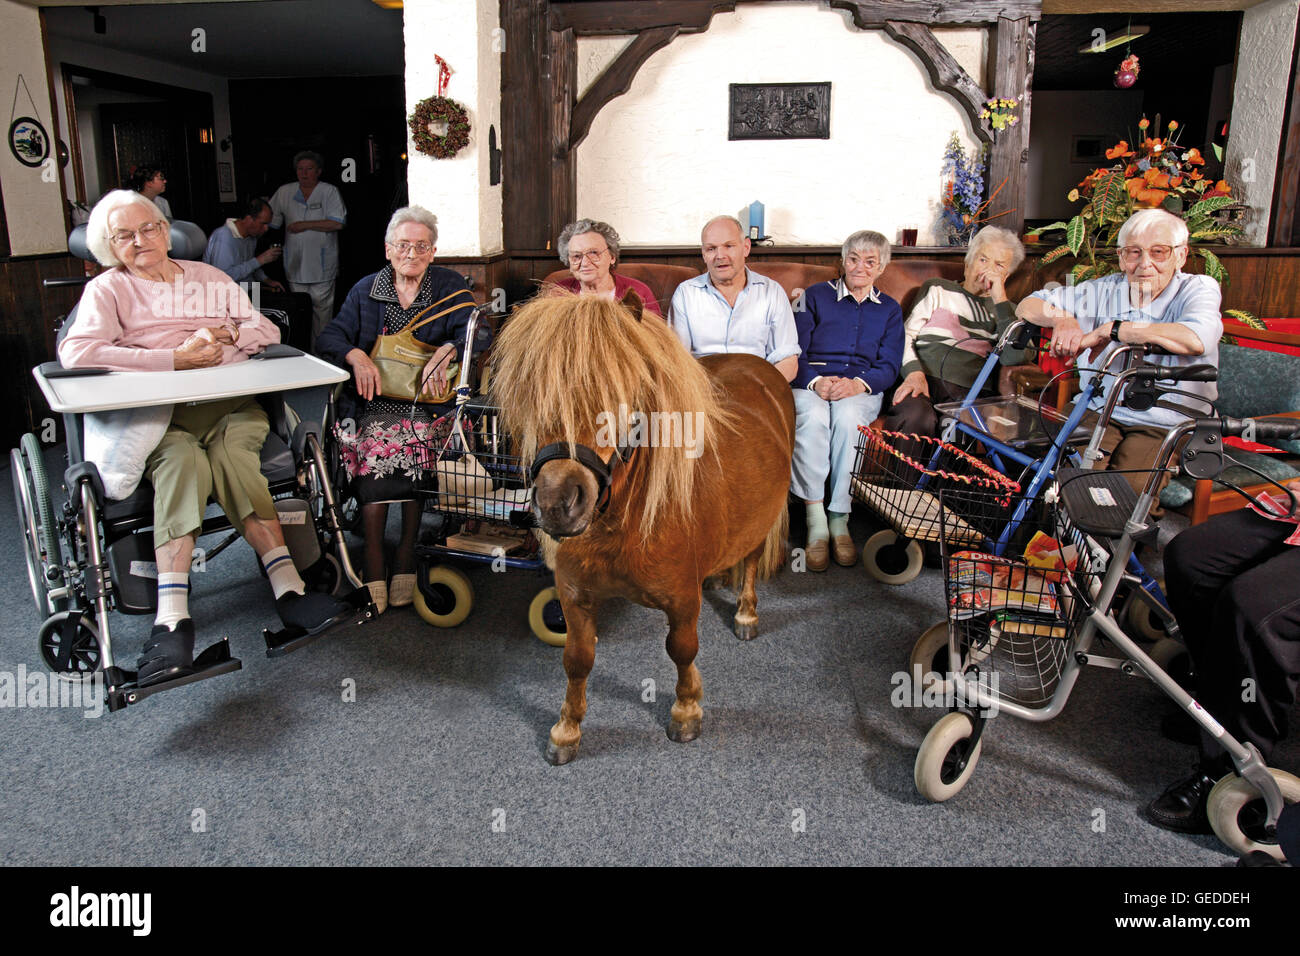 Residents visited by a pony at a nursing home Stock Photo